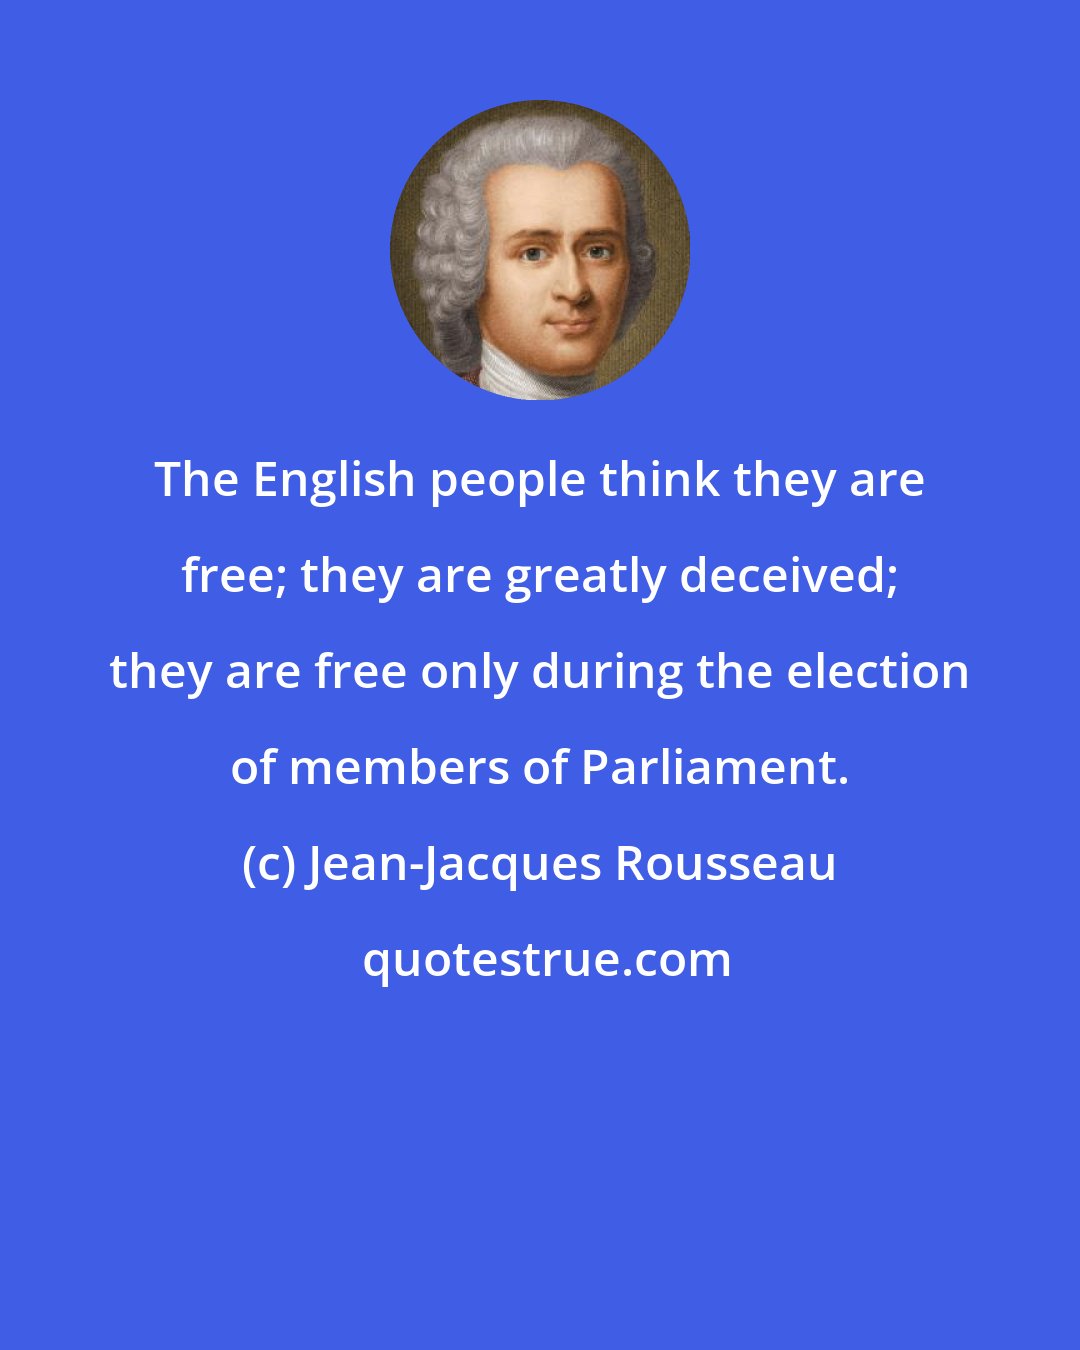 Jean-Jacques Rousseau: The English people think they are free; they are greatly deceived; they are free only during the election of members of Parliament.